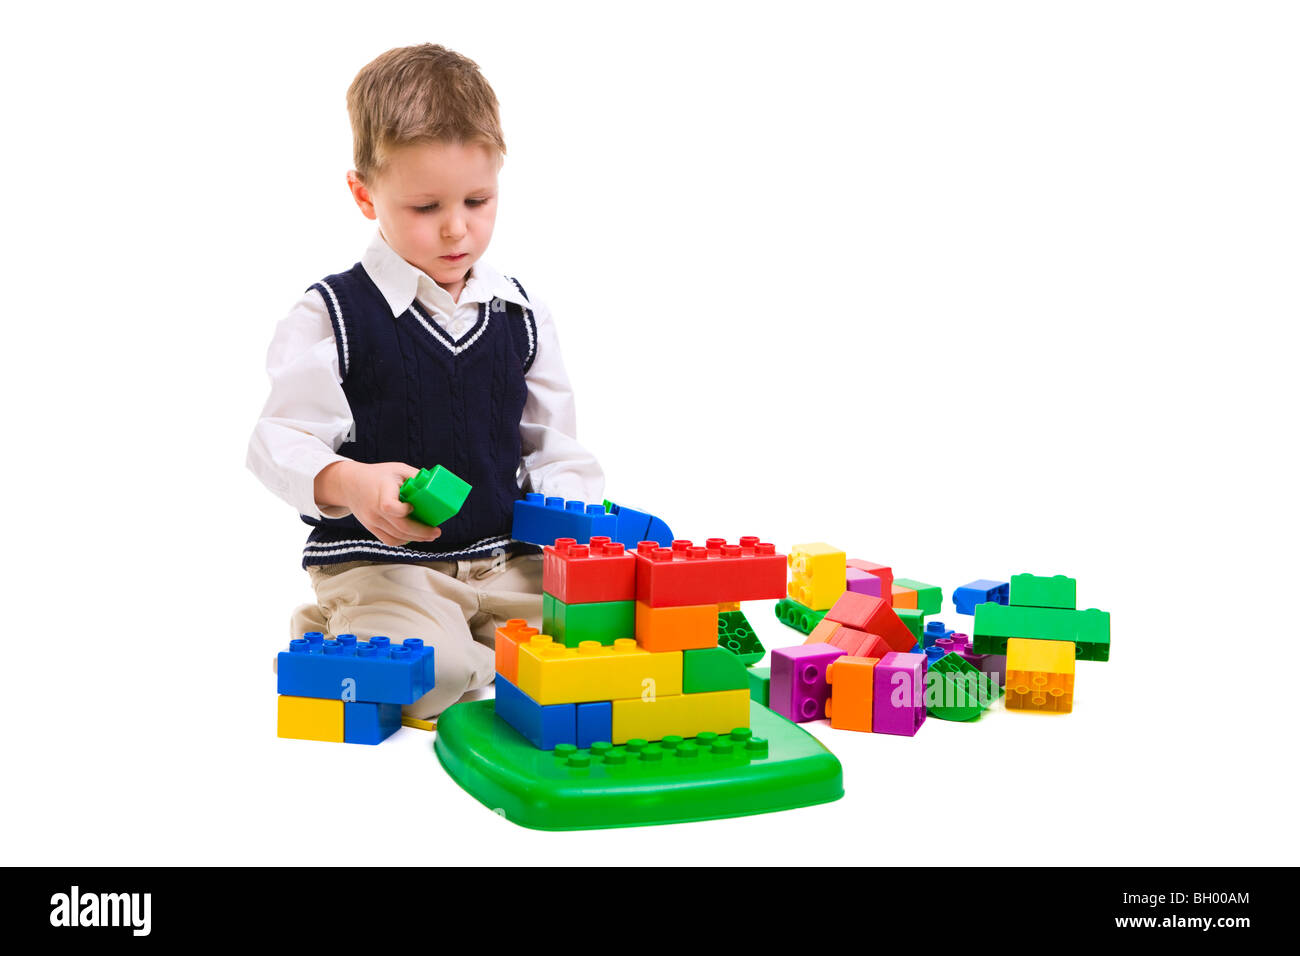 building toys 4 year old boy